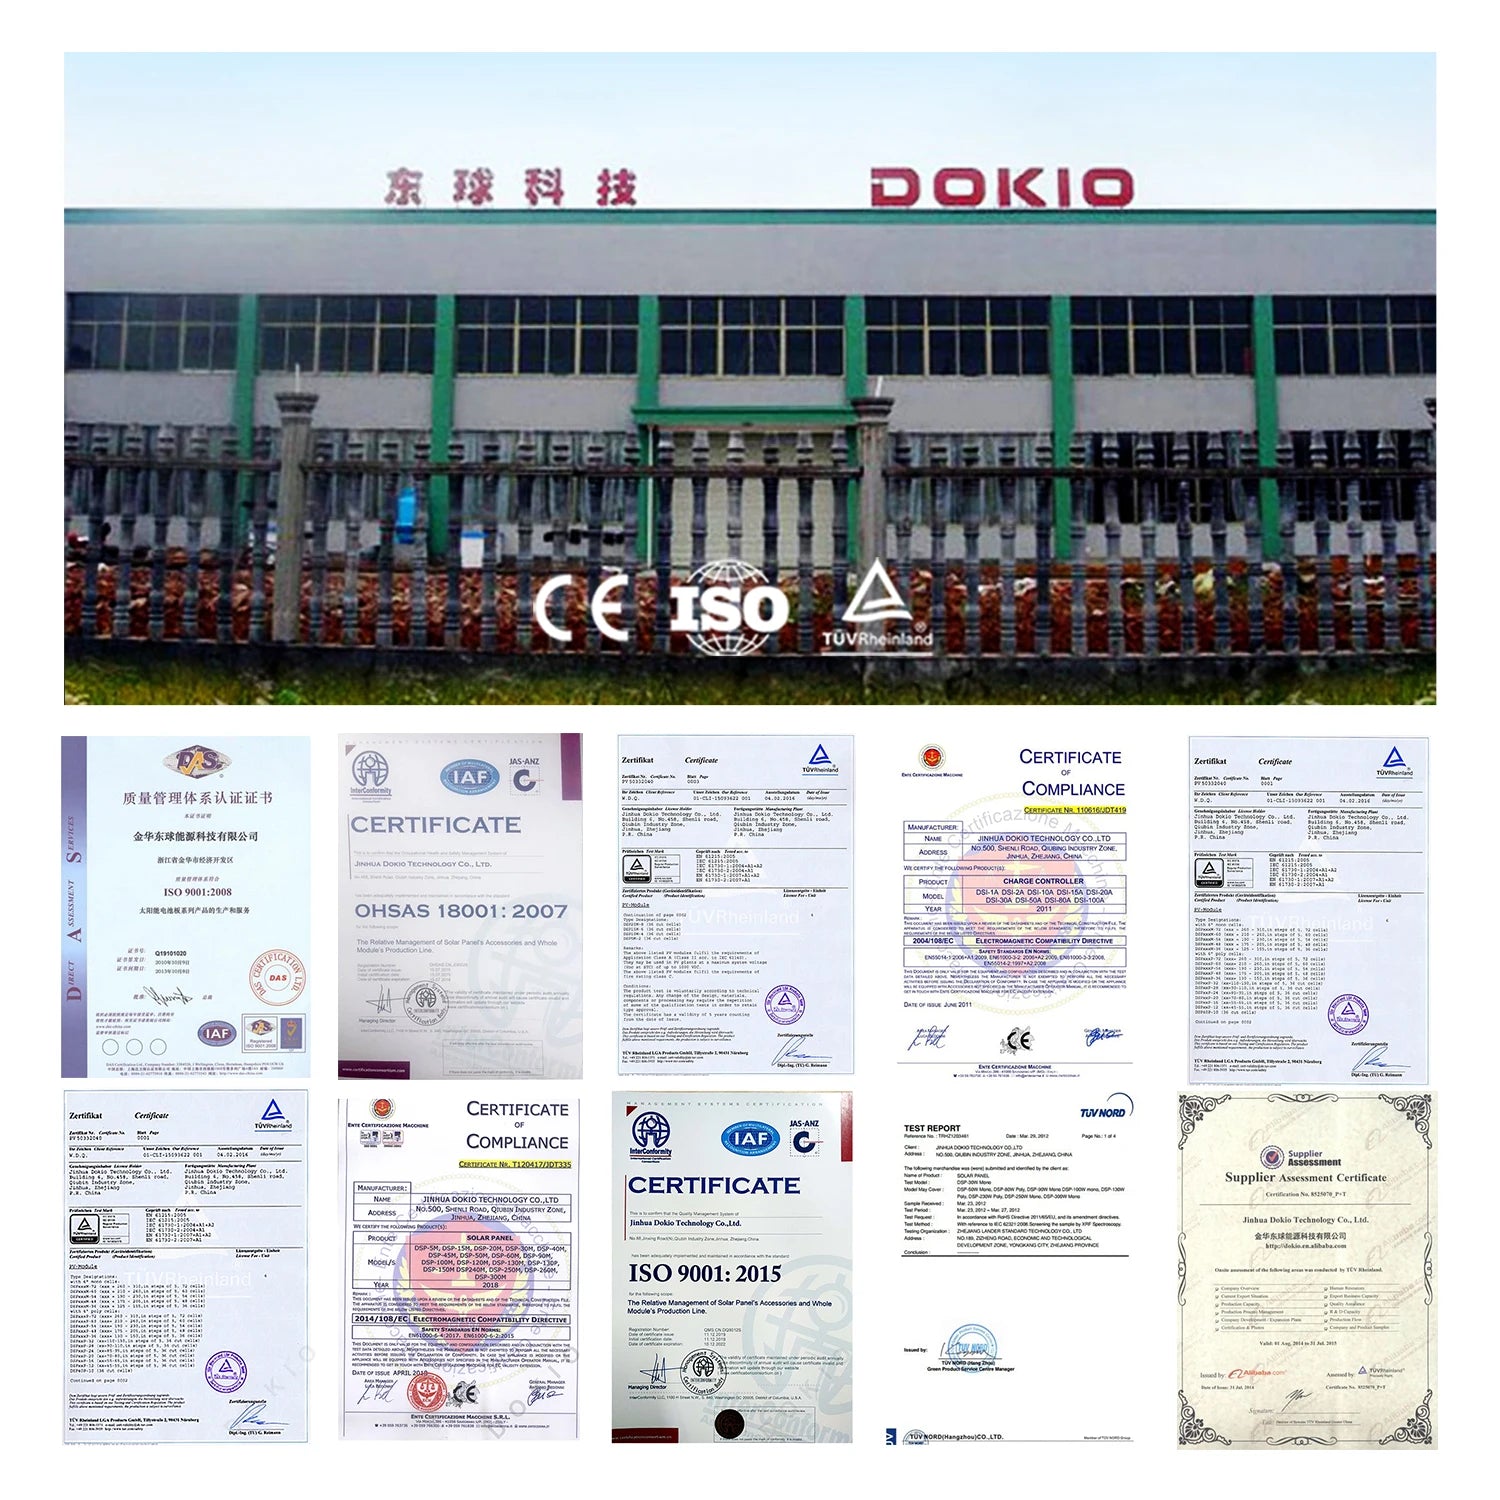 Dokio Certificate of Conformity: International safety standards certification for portable solar panel.